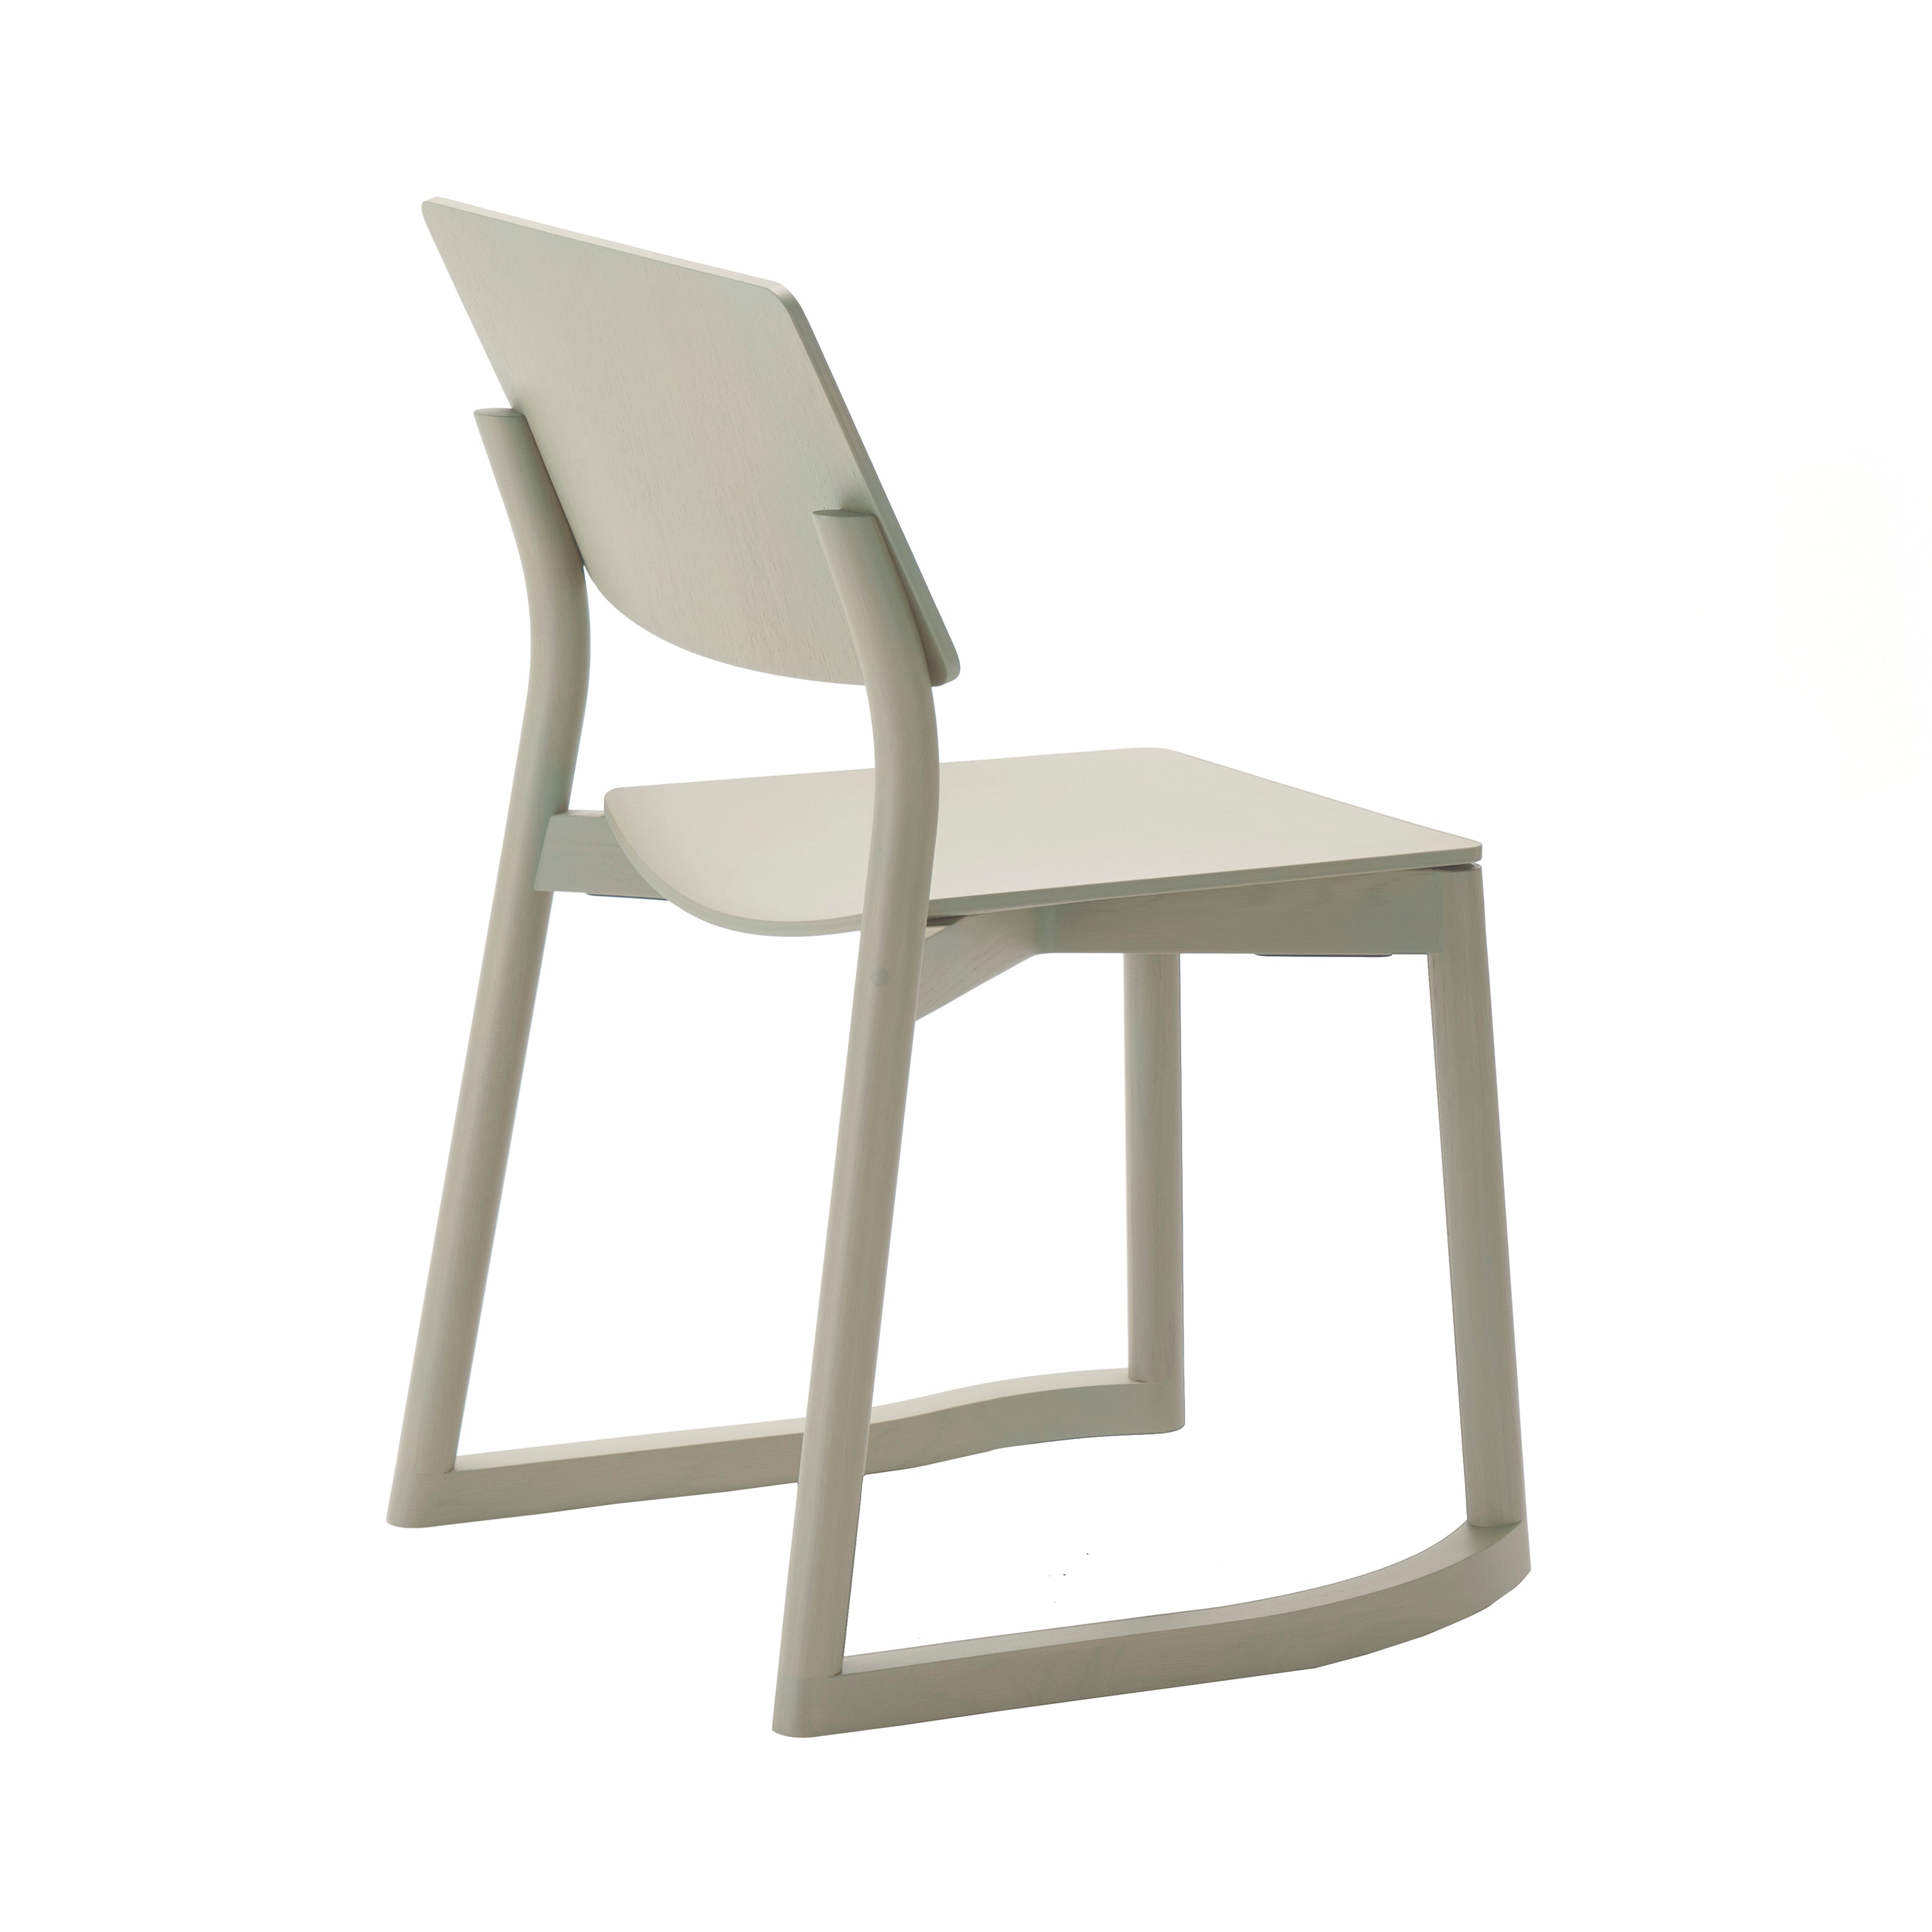 Panorama Chair With Runners: Grey Green Oak